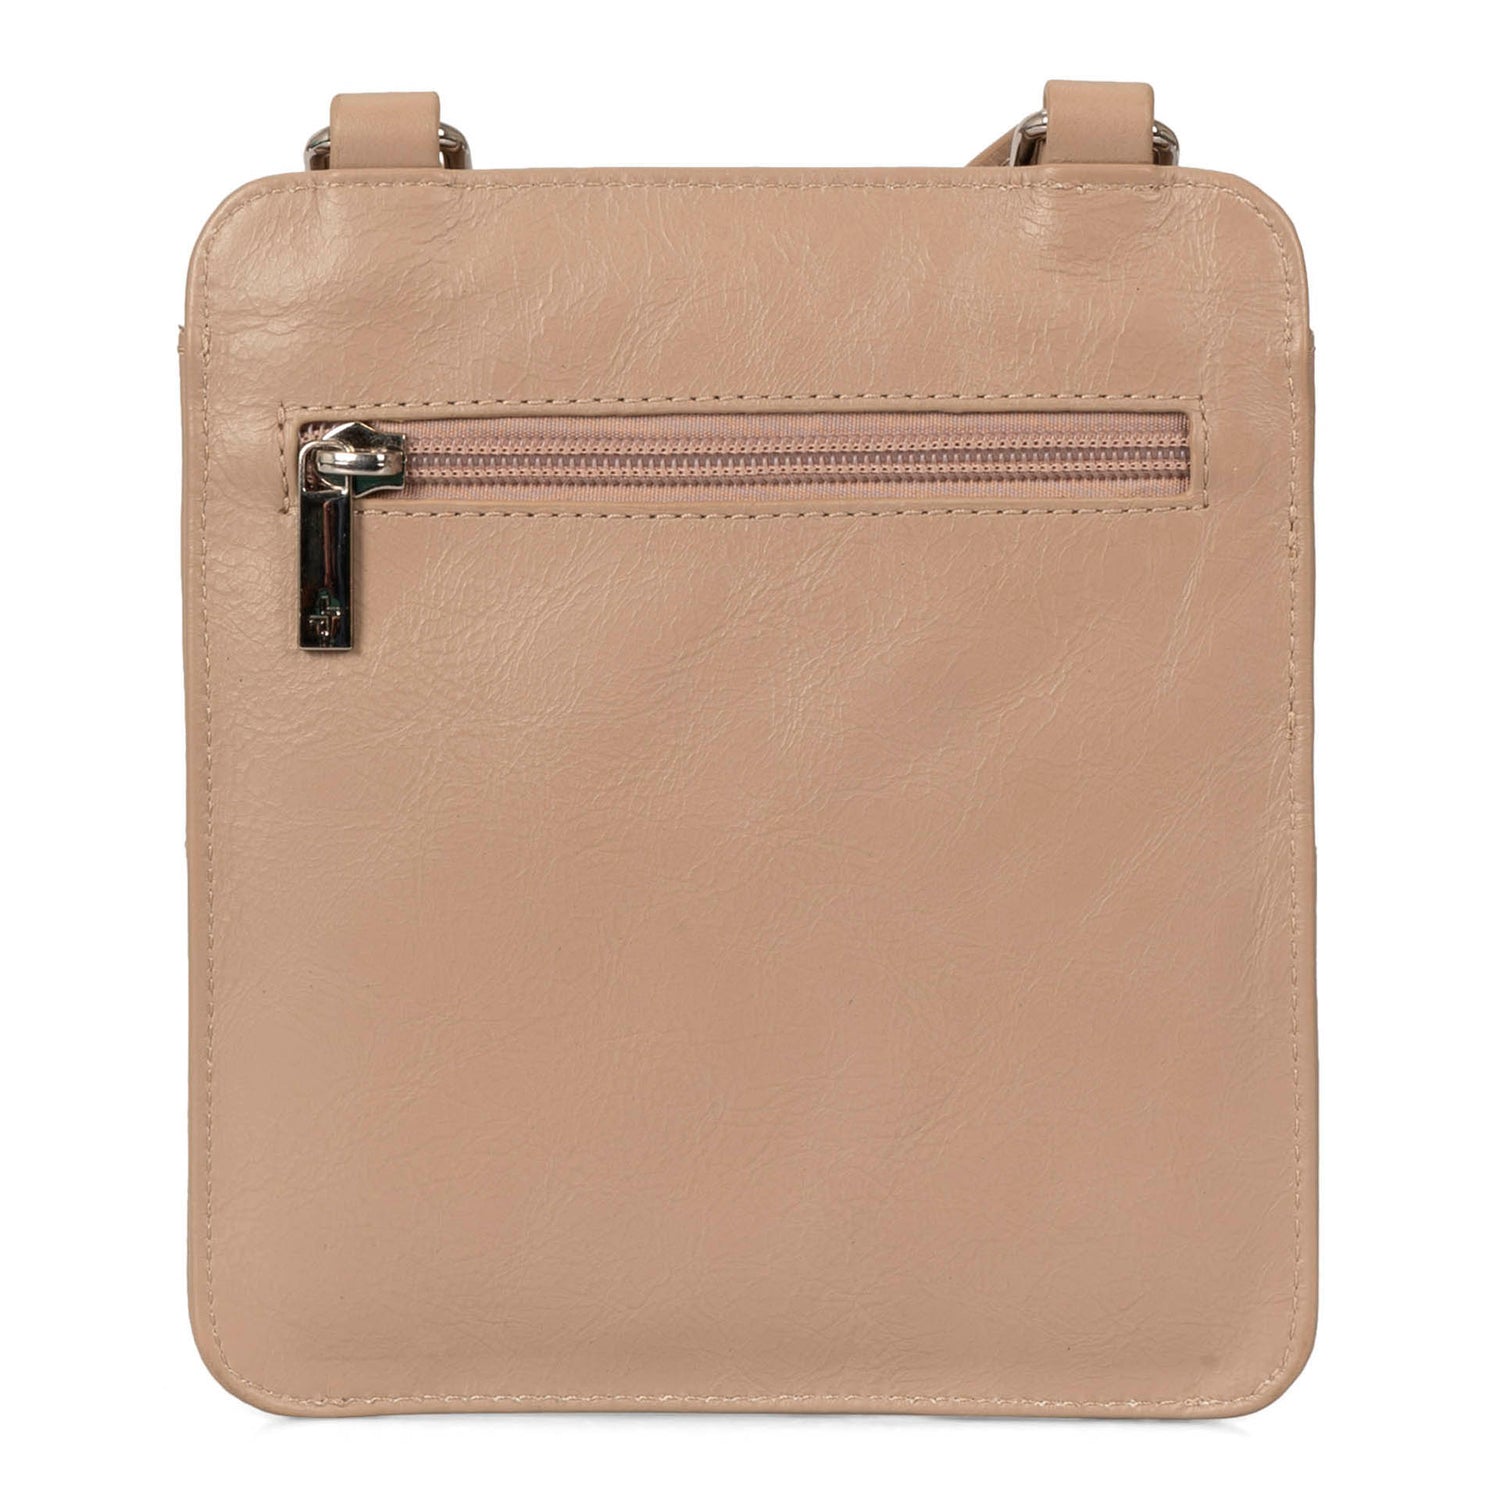 Back view of a beige slim crossobdy bag called Basics designed by Tracker showing its supple leather, crossbody strap, and exterior zipper pocket.